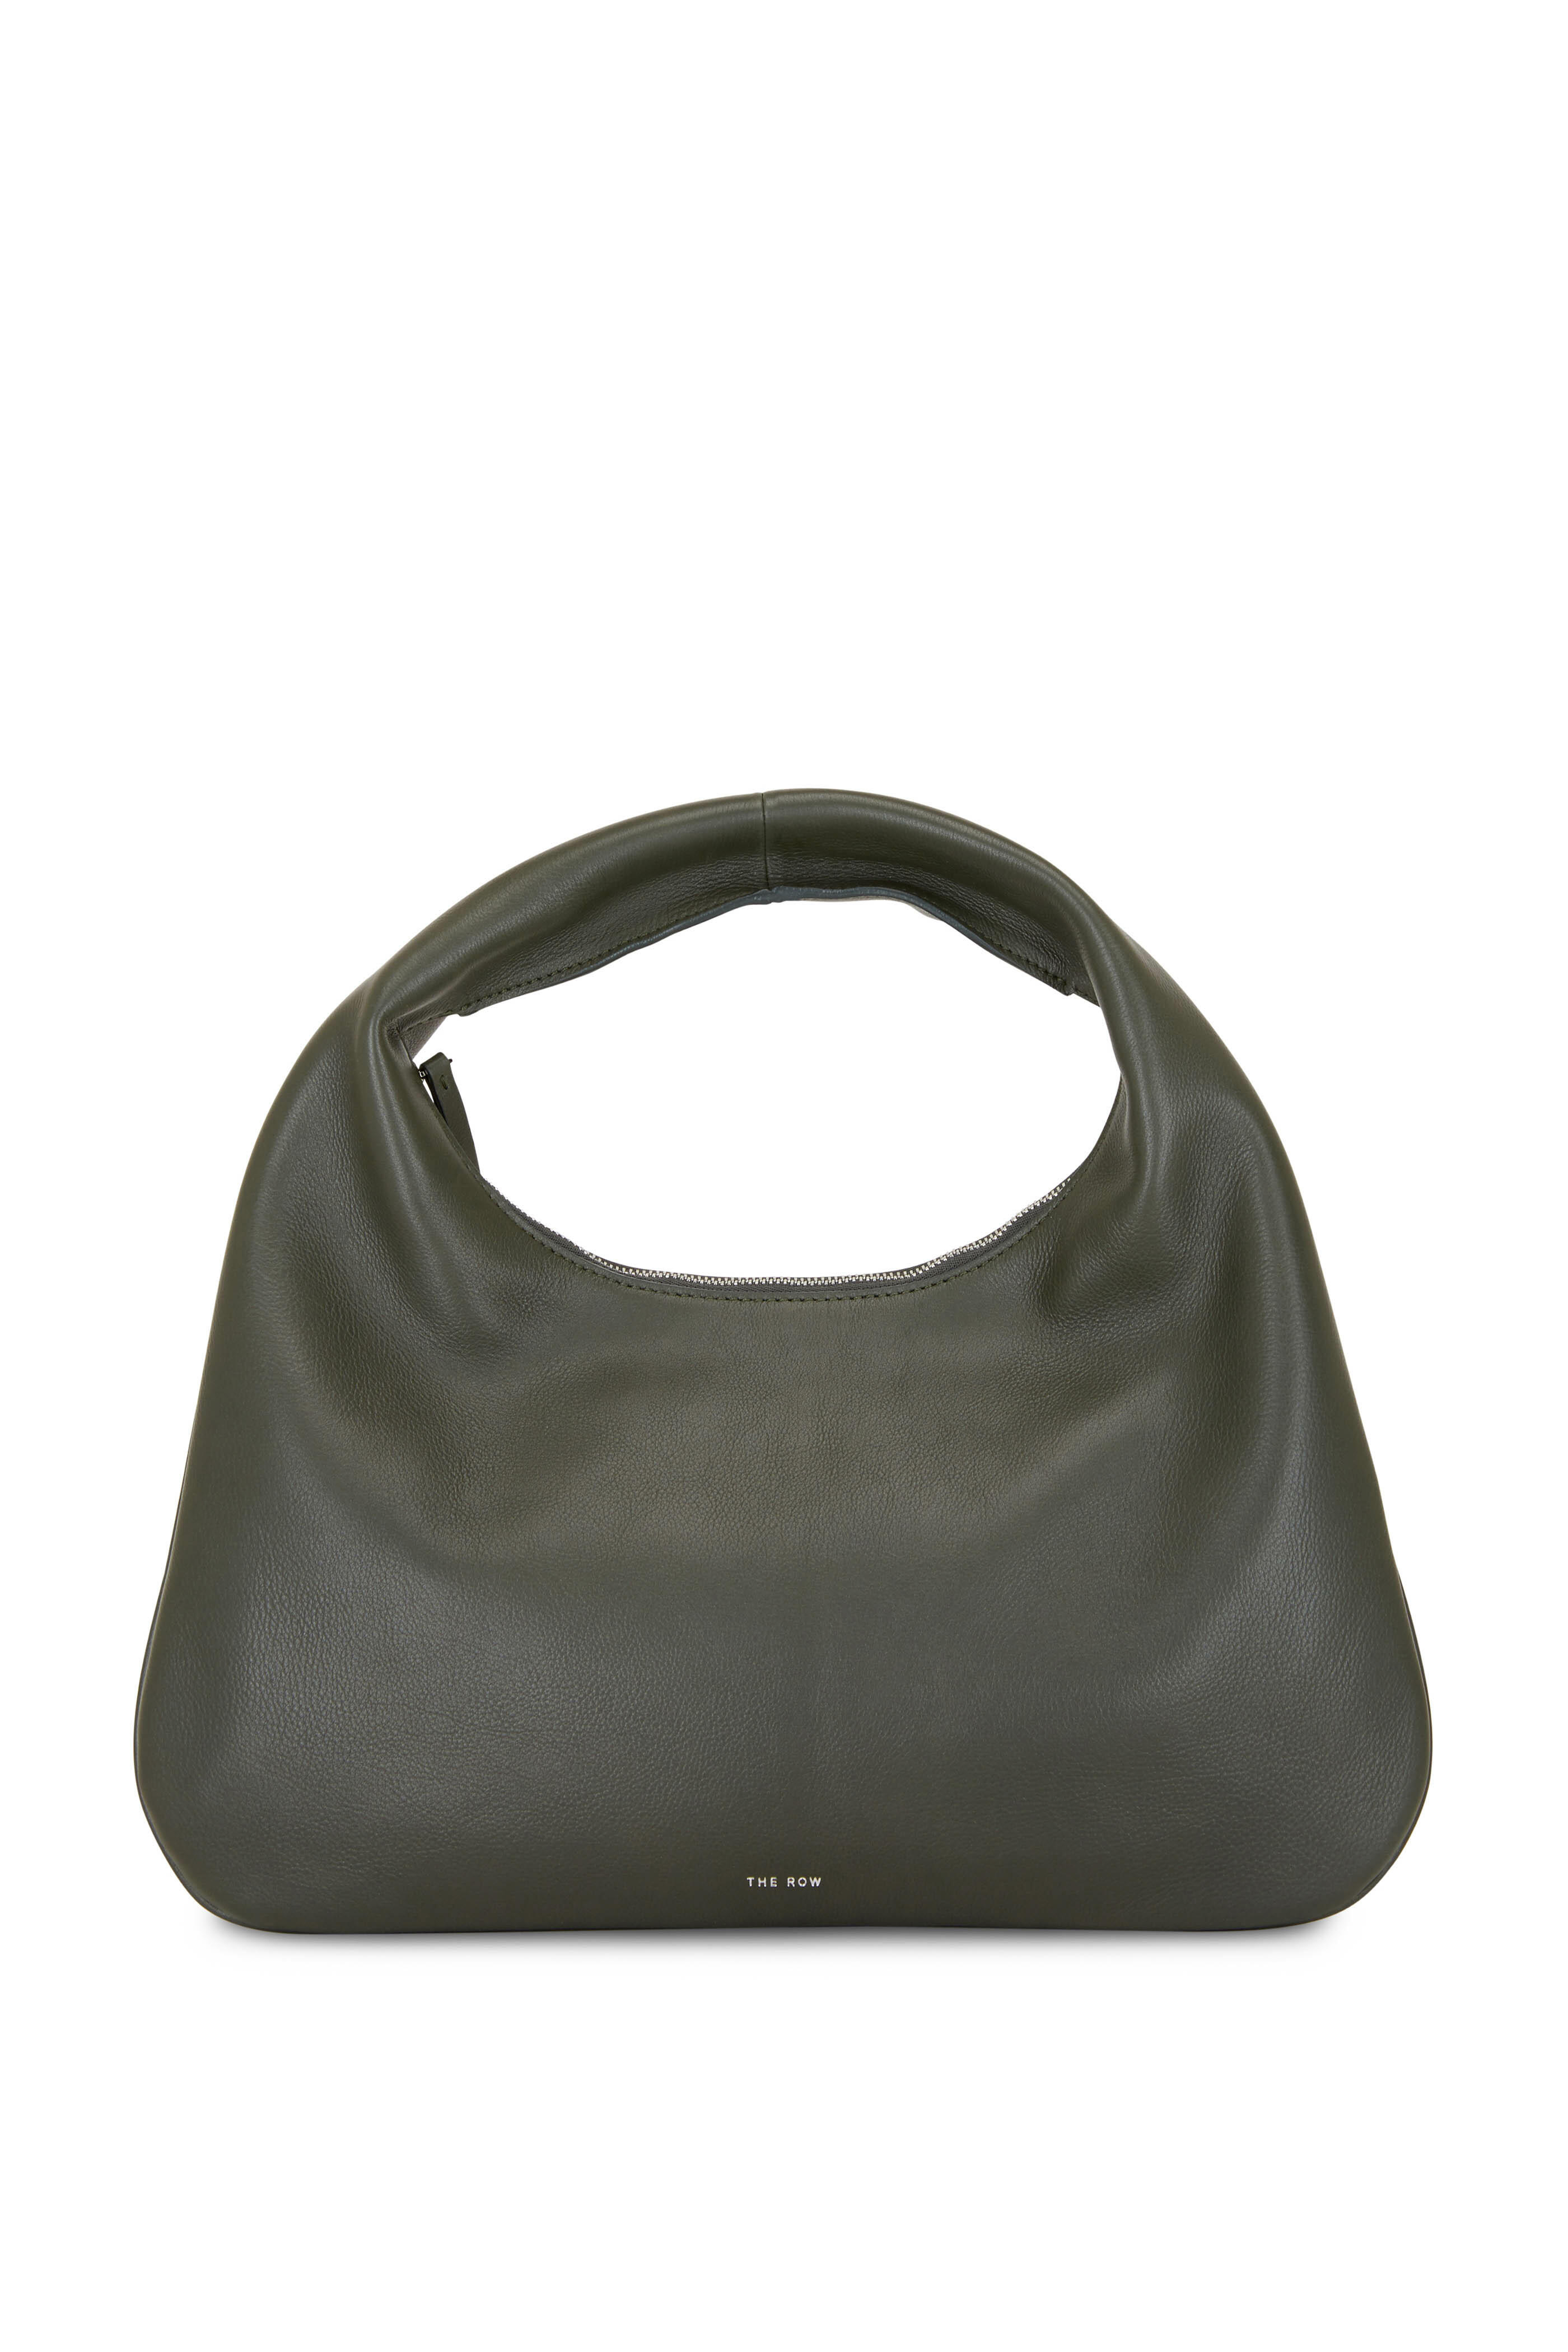 The Row, Everyday Small black leather shoulder bag